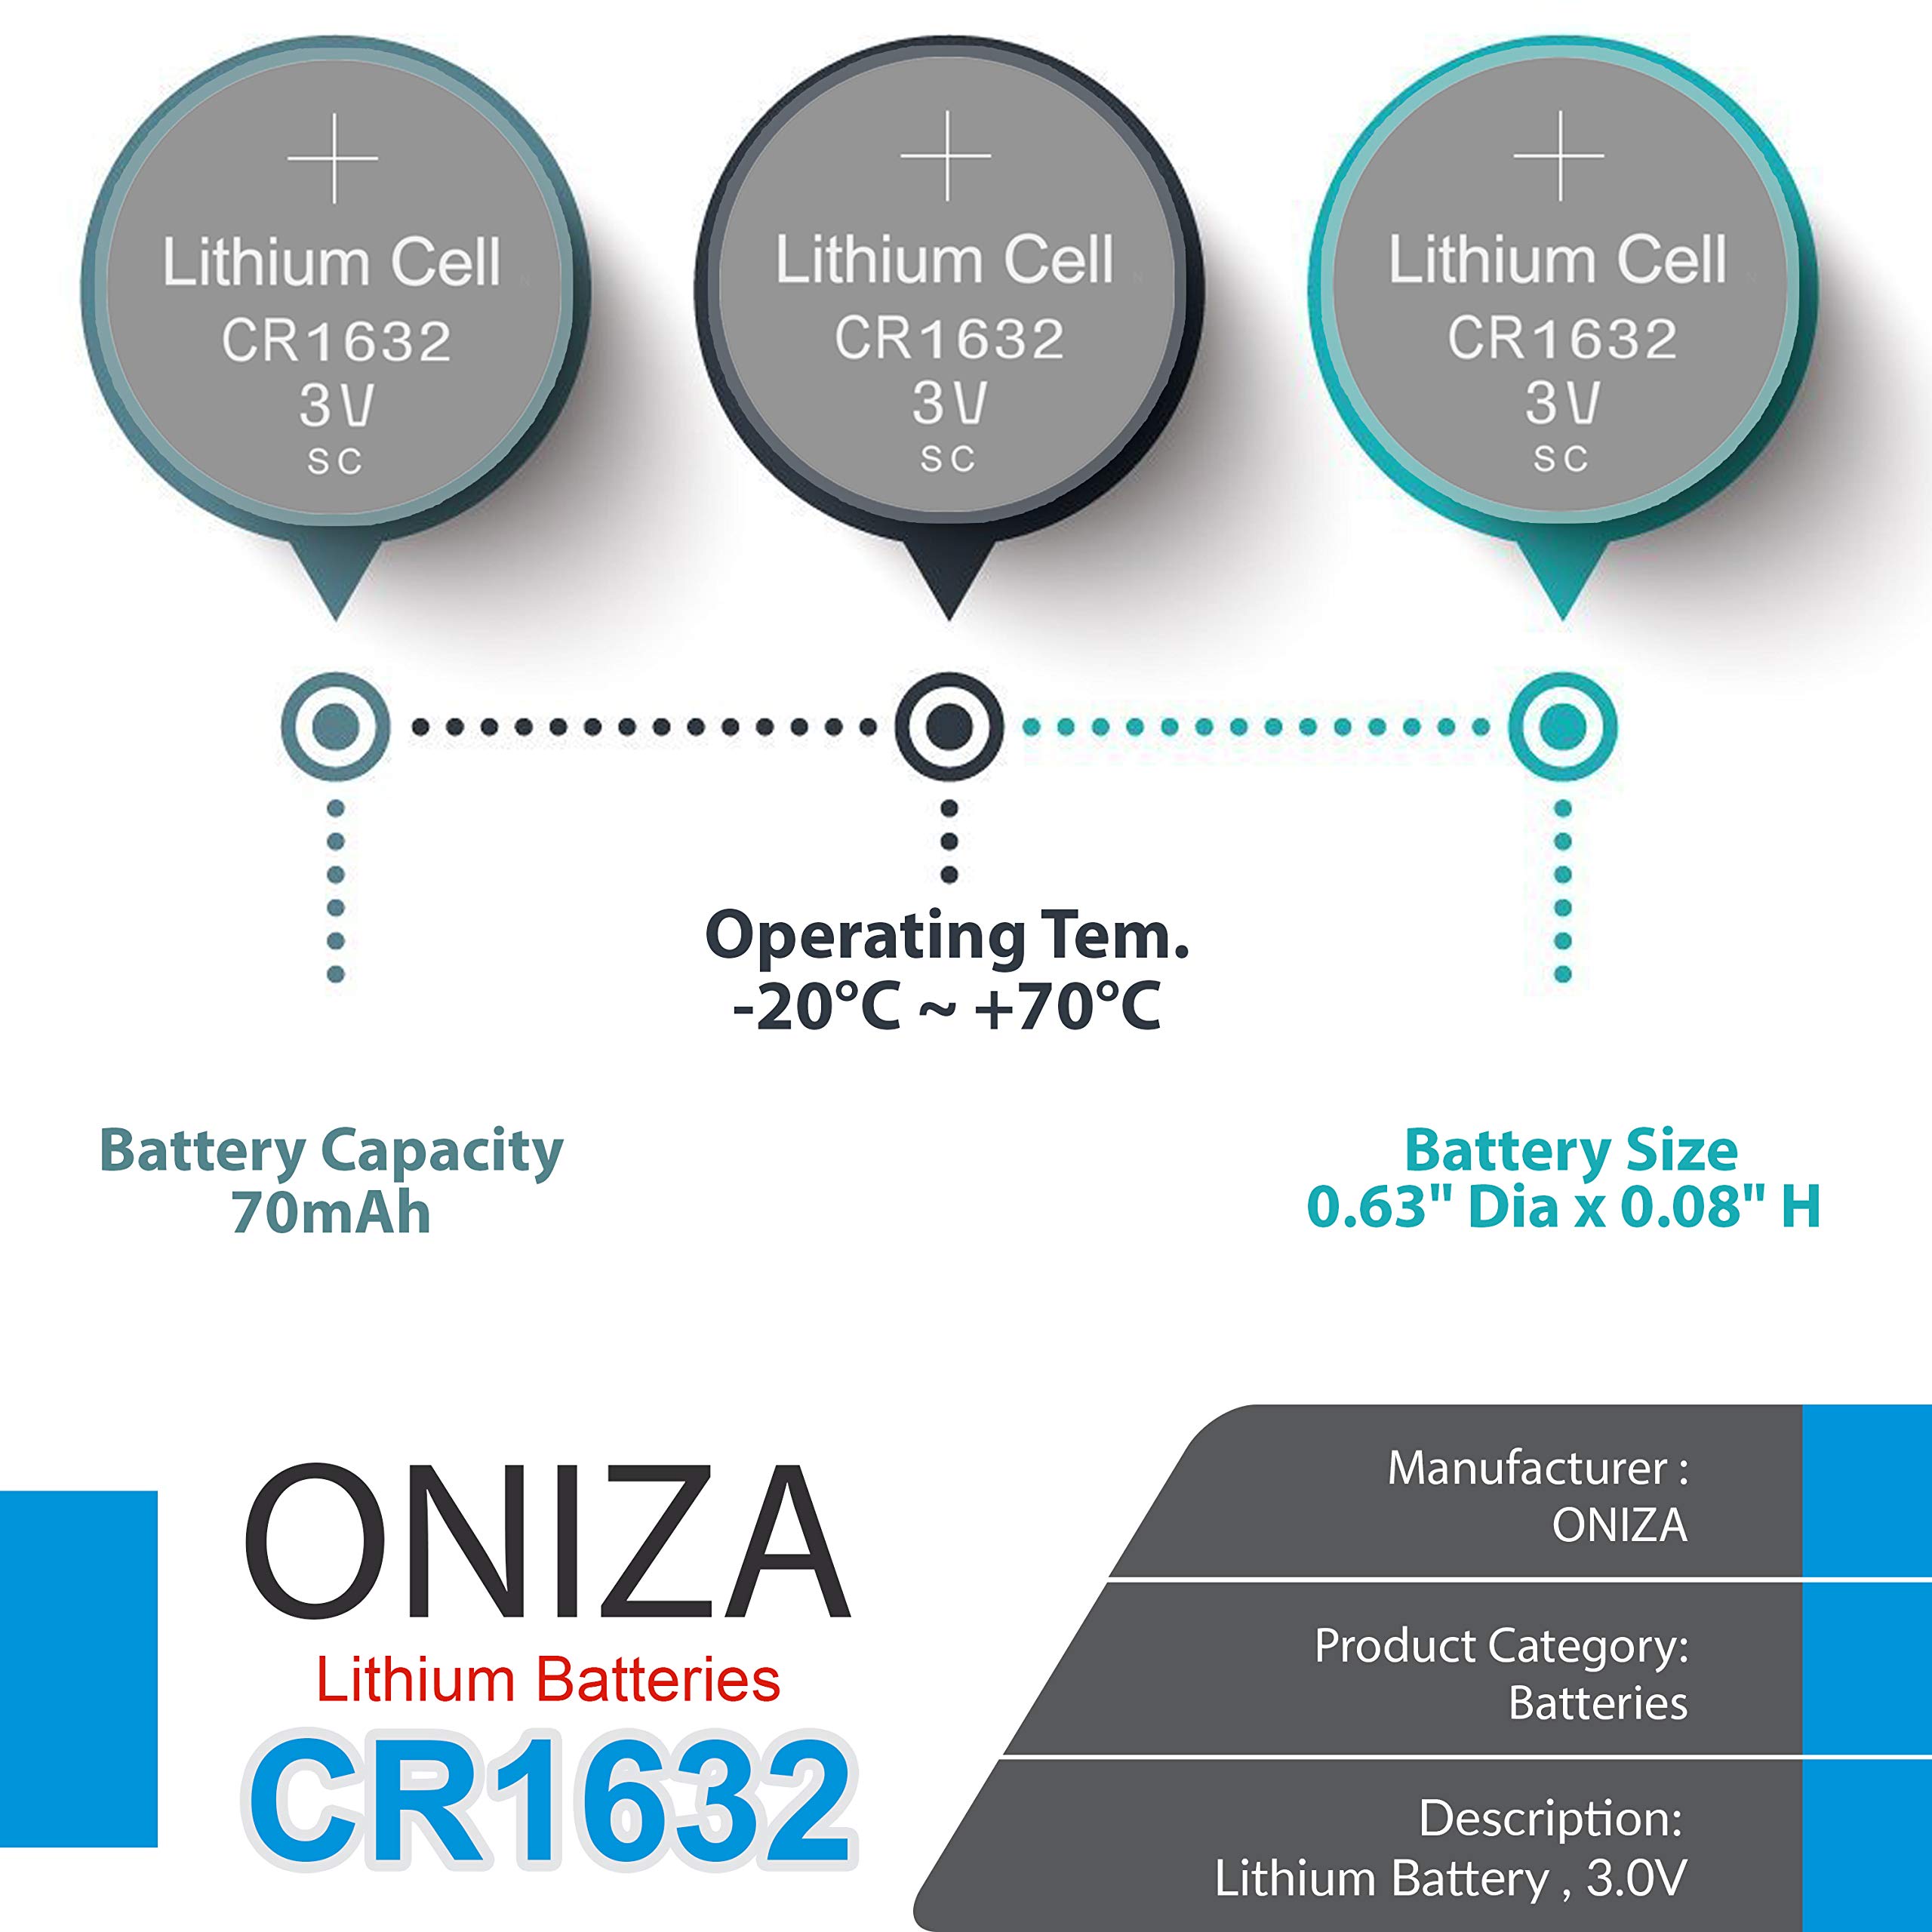 Oniza 8 Pack CR 1632 Battery Lithium 3v Batteries for Car Key Remote Watch LED Key fob Replacement